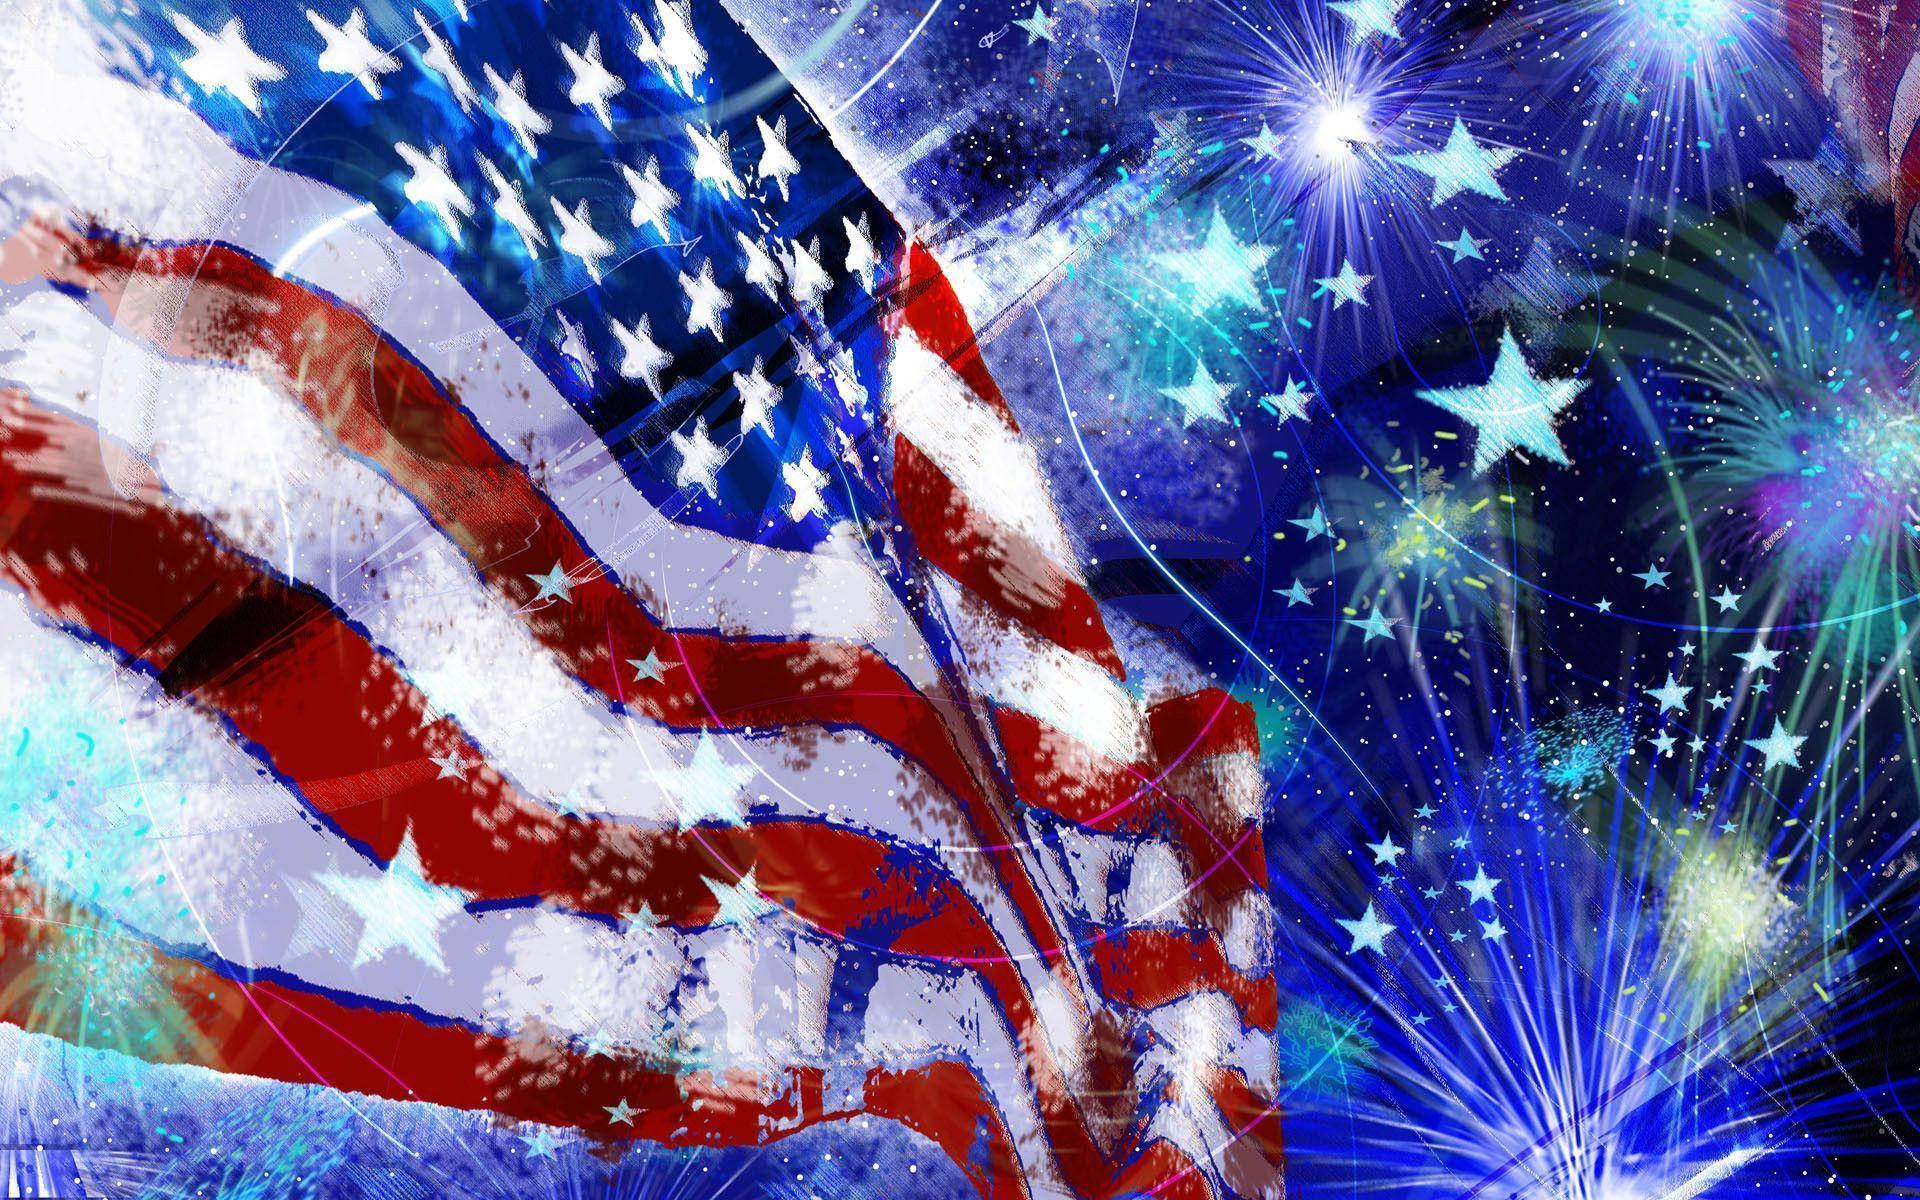 A Painting Of An American Flag With Fireworks Background